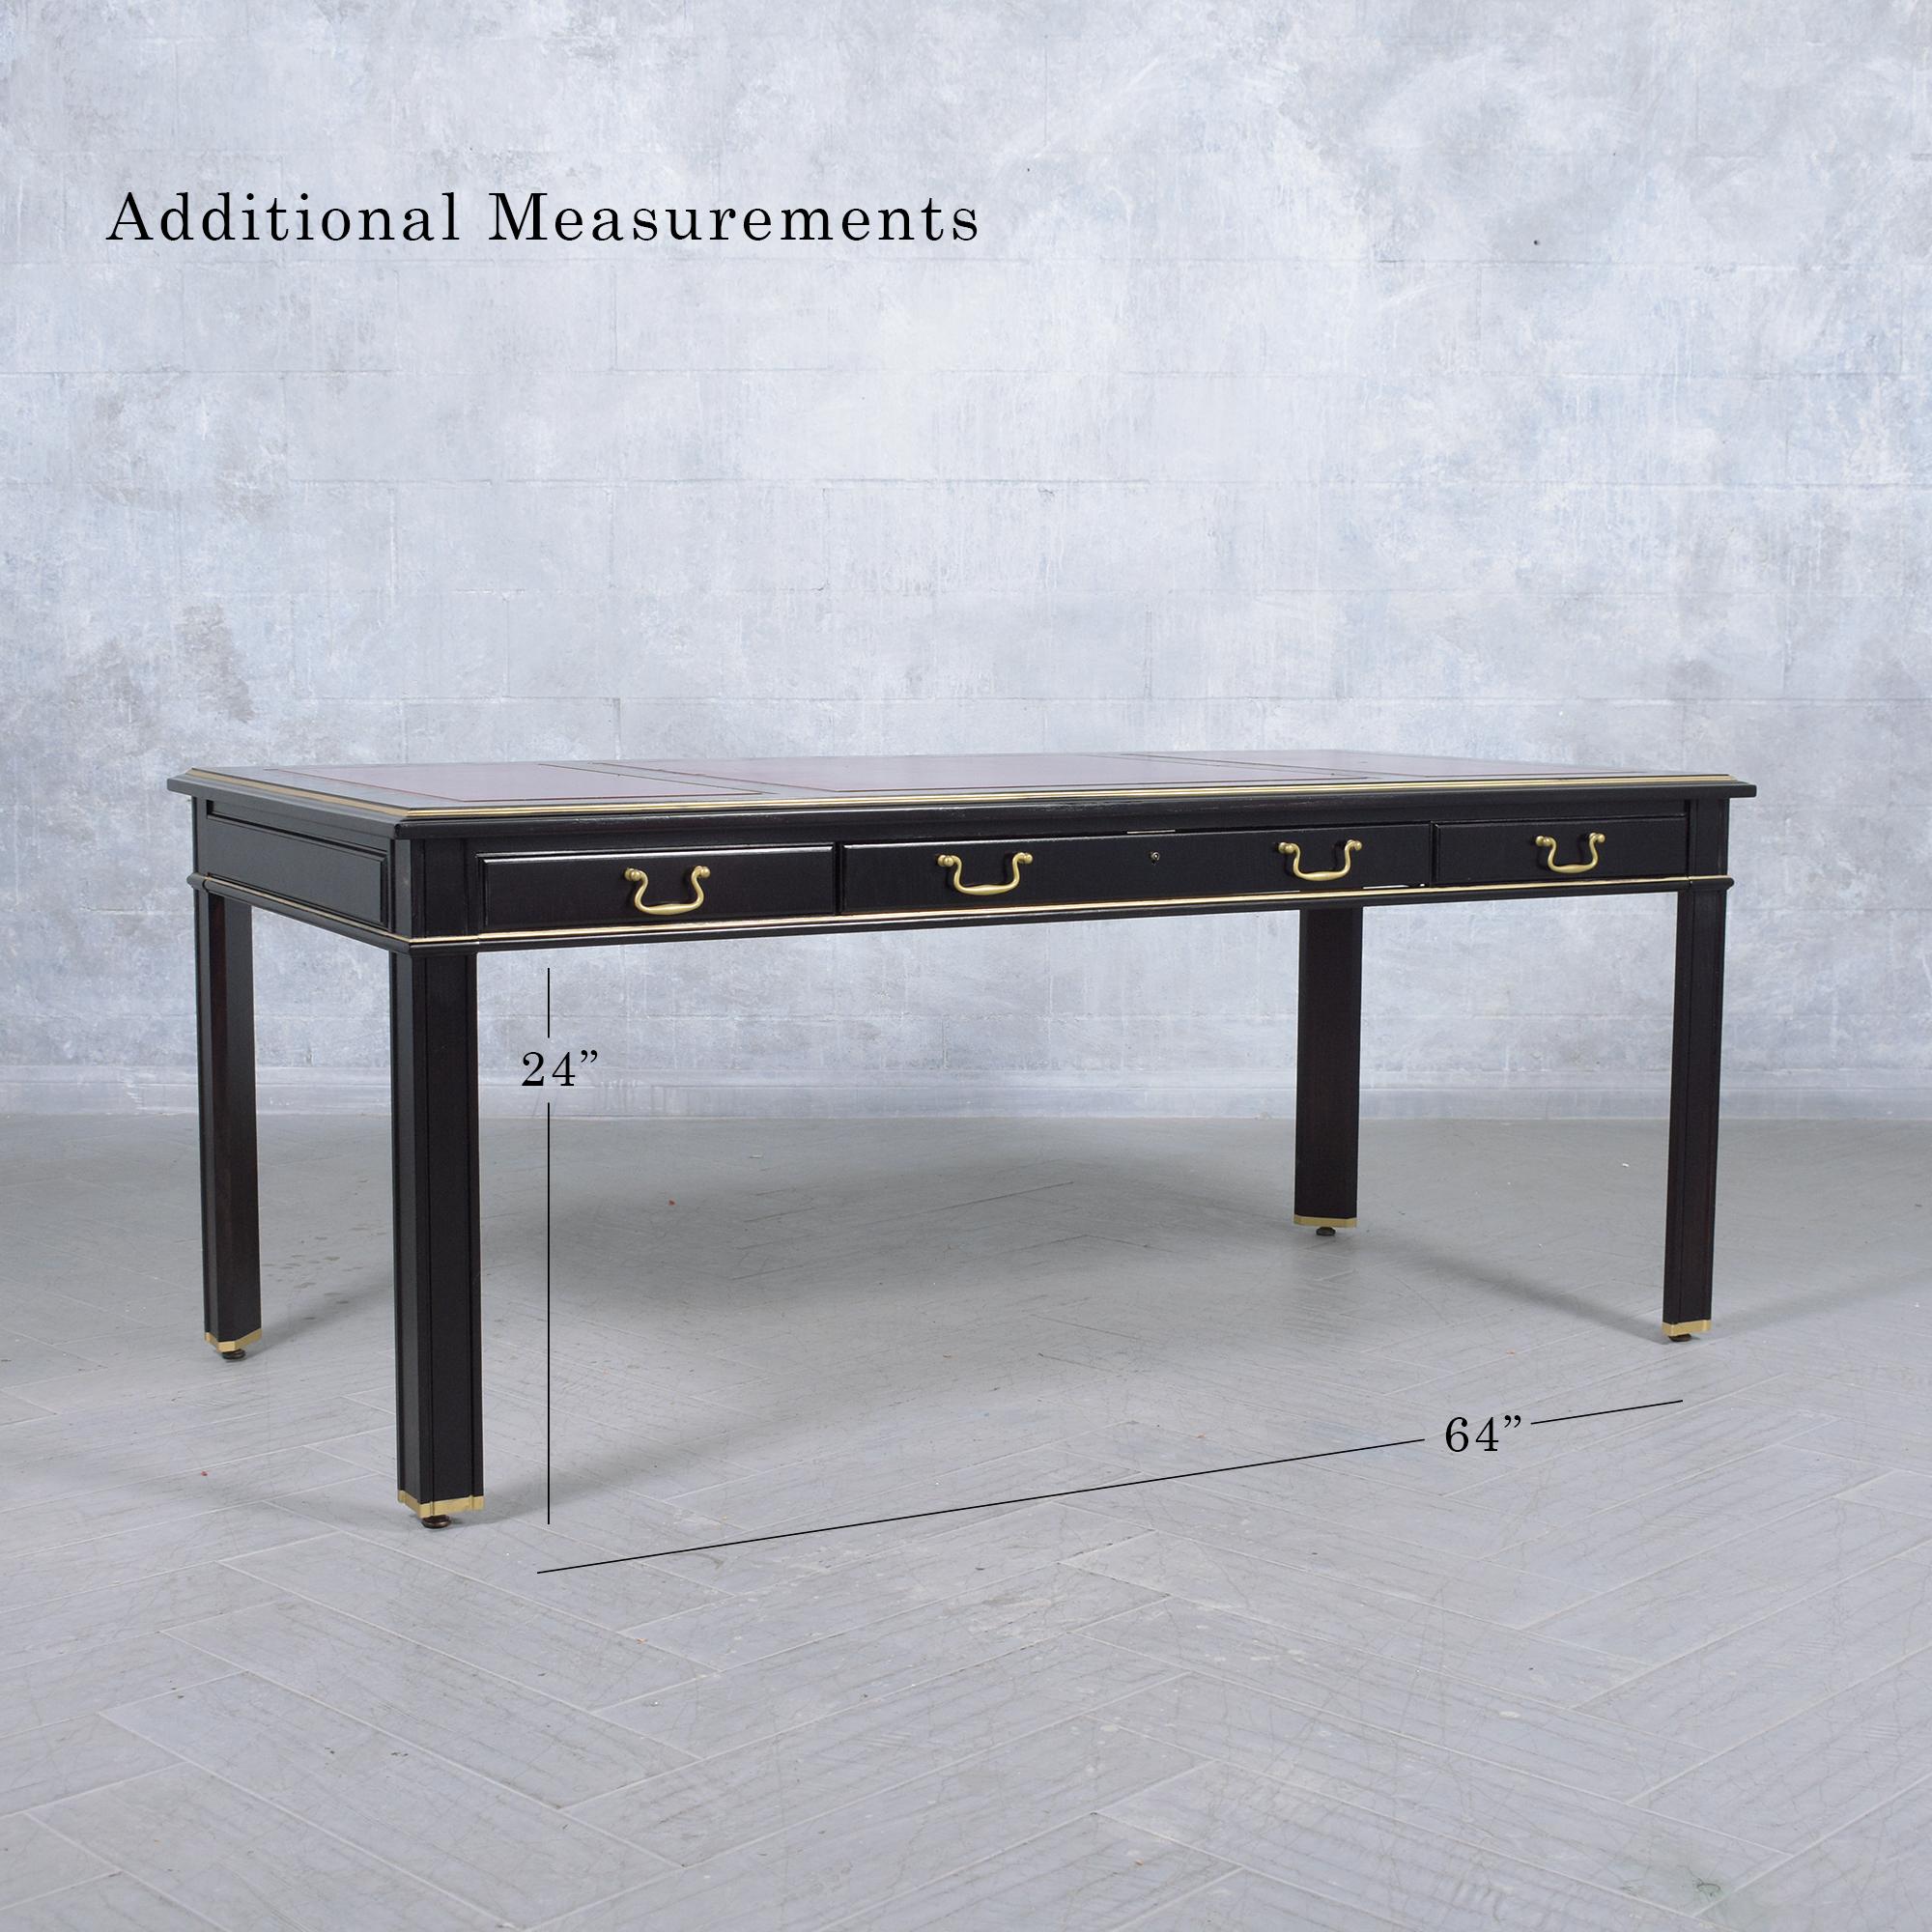 1970s Louis XVI Executive Desk: A Legacy of Elegance and Craftsmanship 4